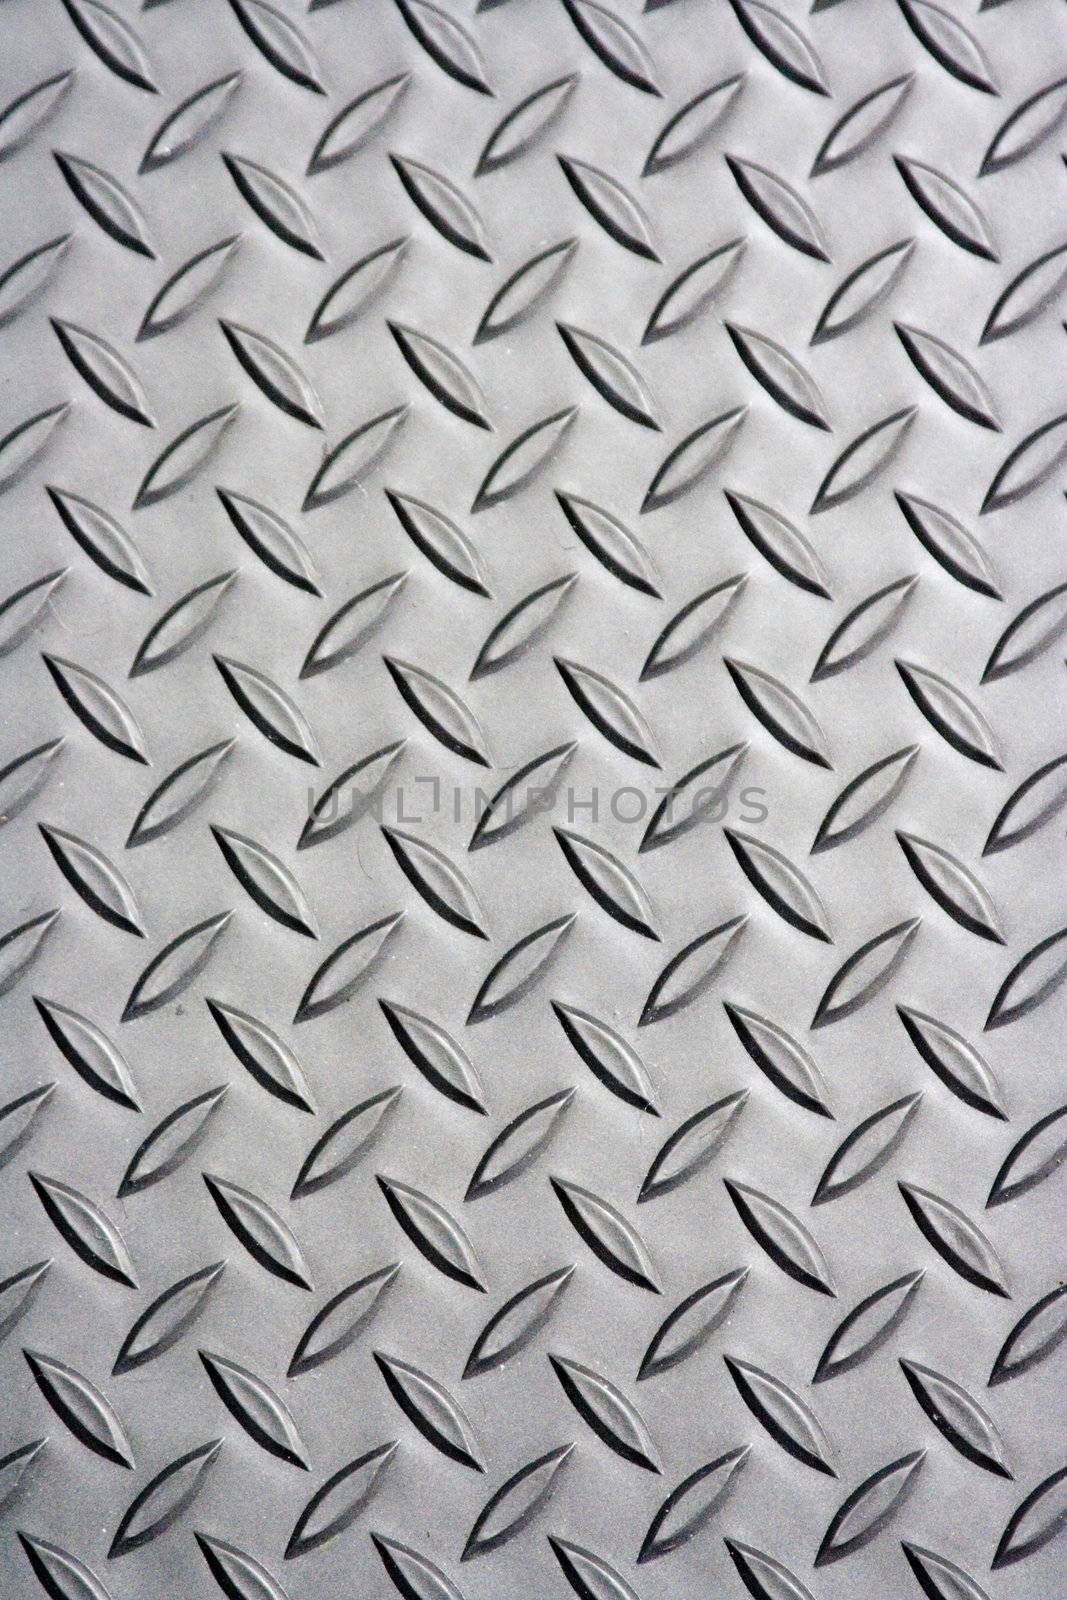 diamond plate photo good background image for the web